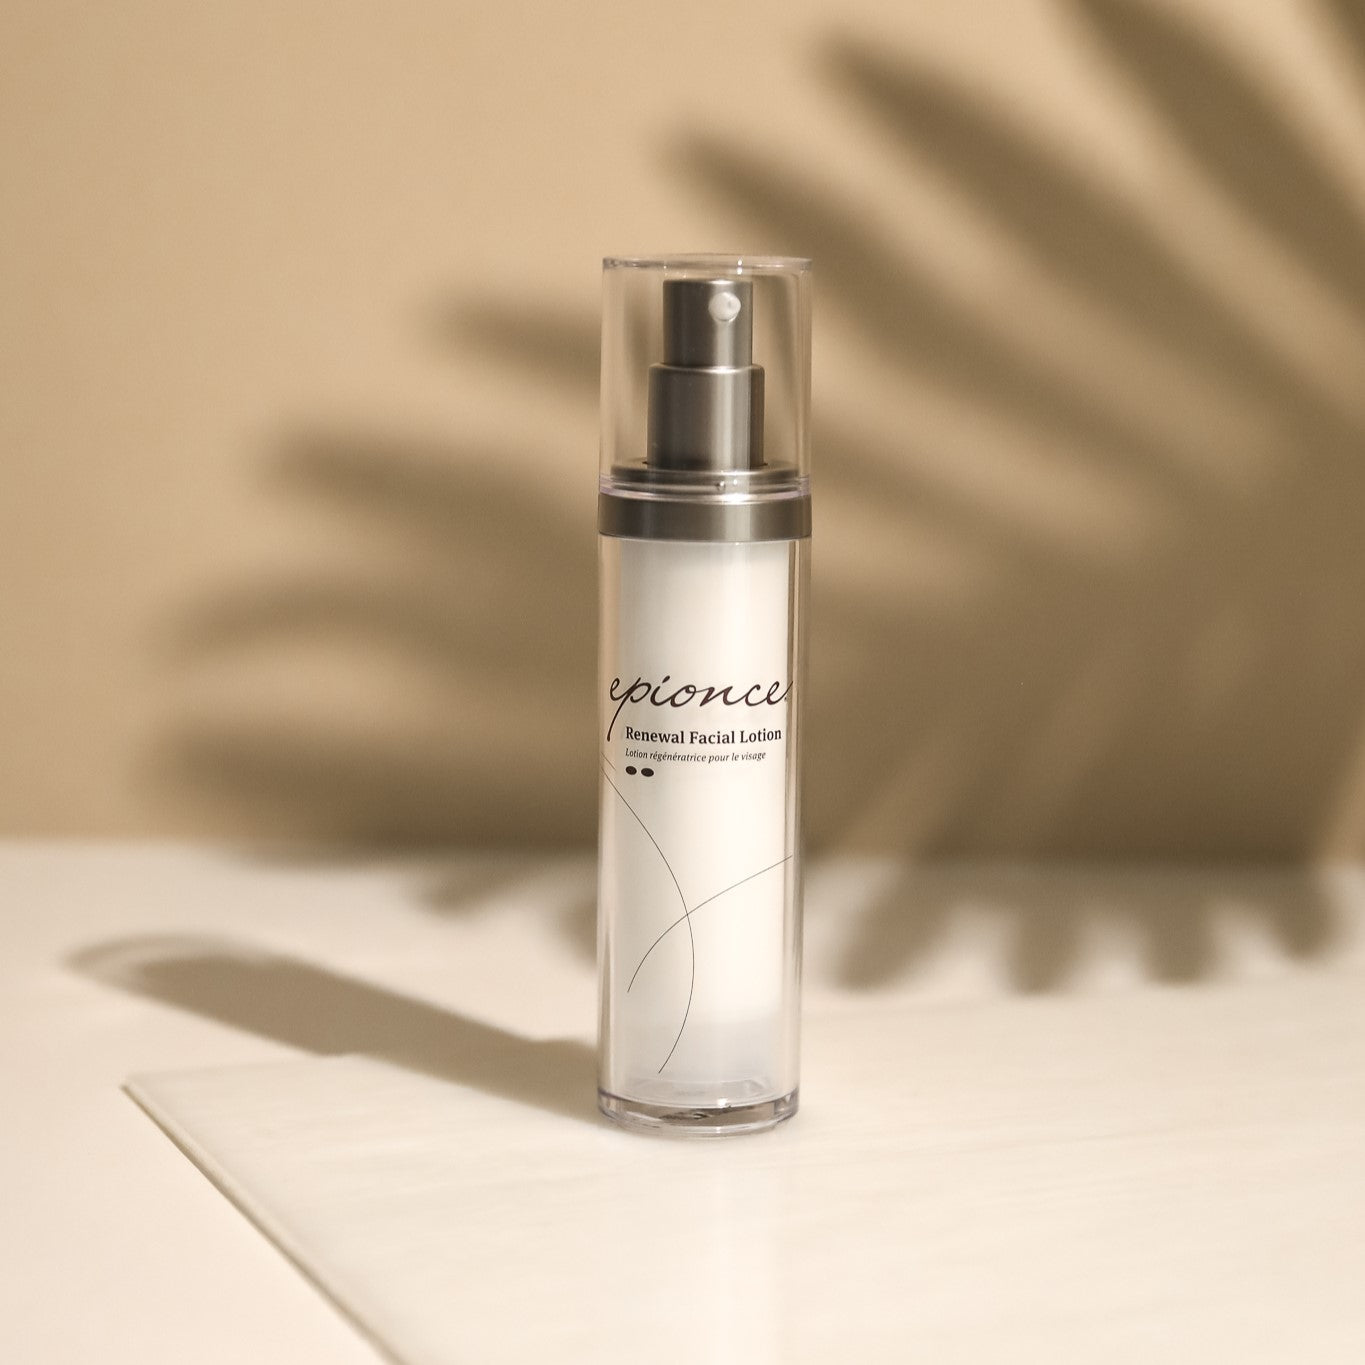 Improve your face's radiance with Epionce Renewal Facial Lotion